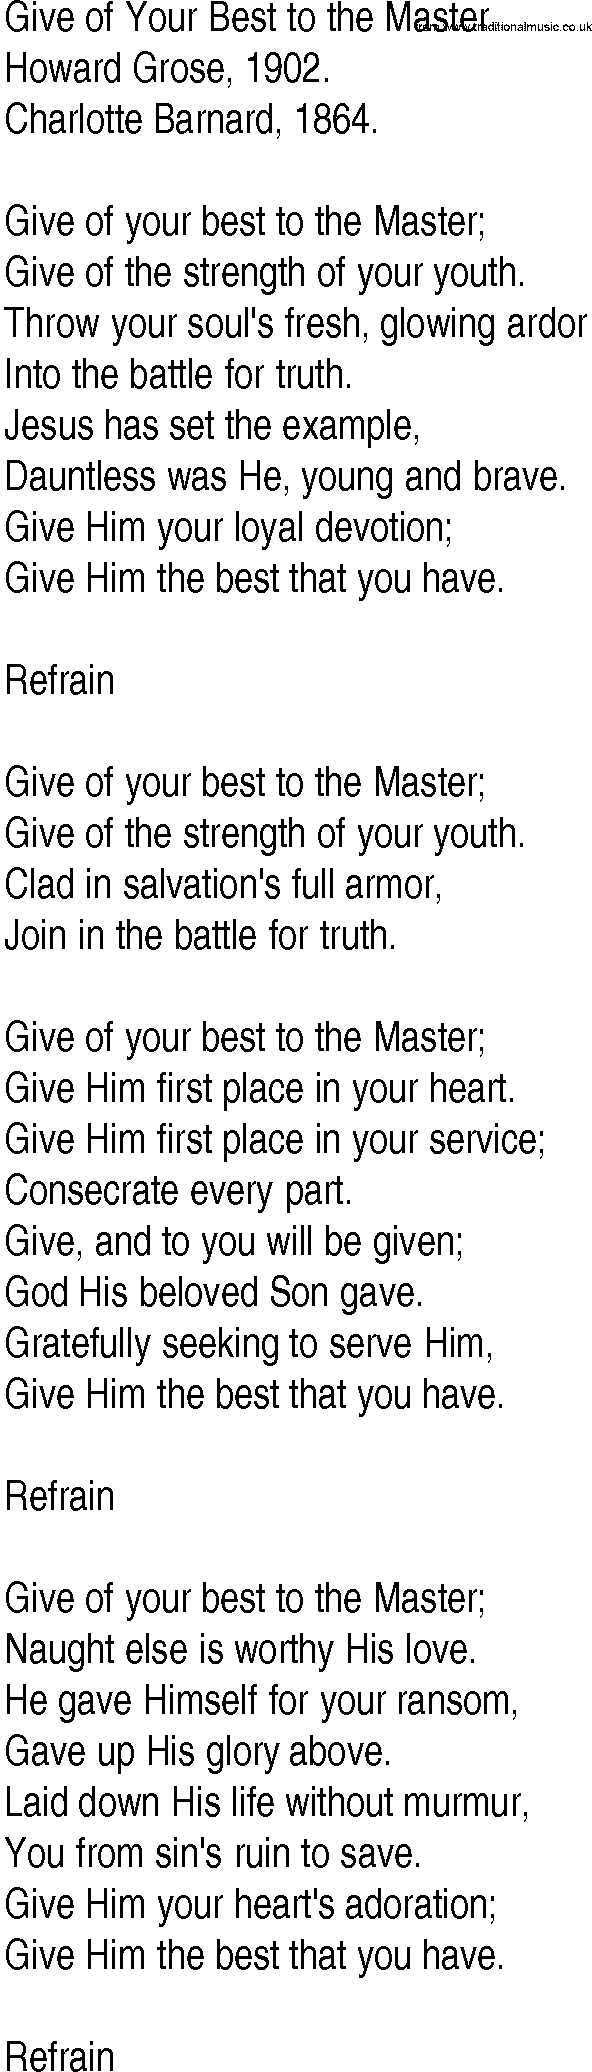 Hymn and Gospel Song: Give of Your Best to the Master by Howard Grose lyrics